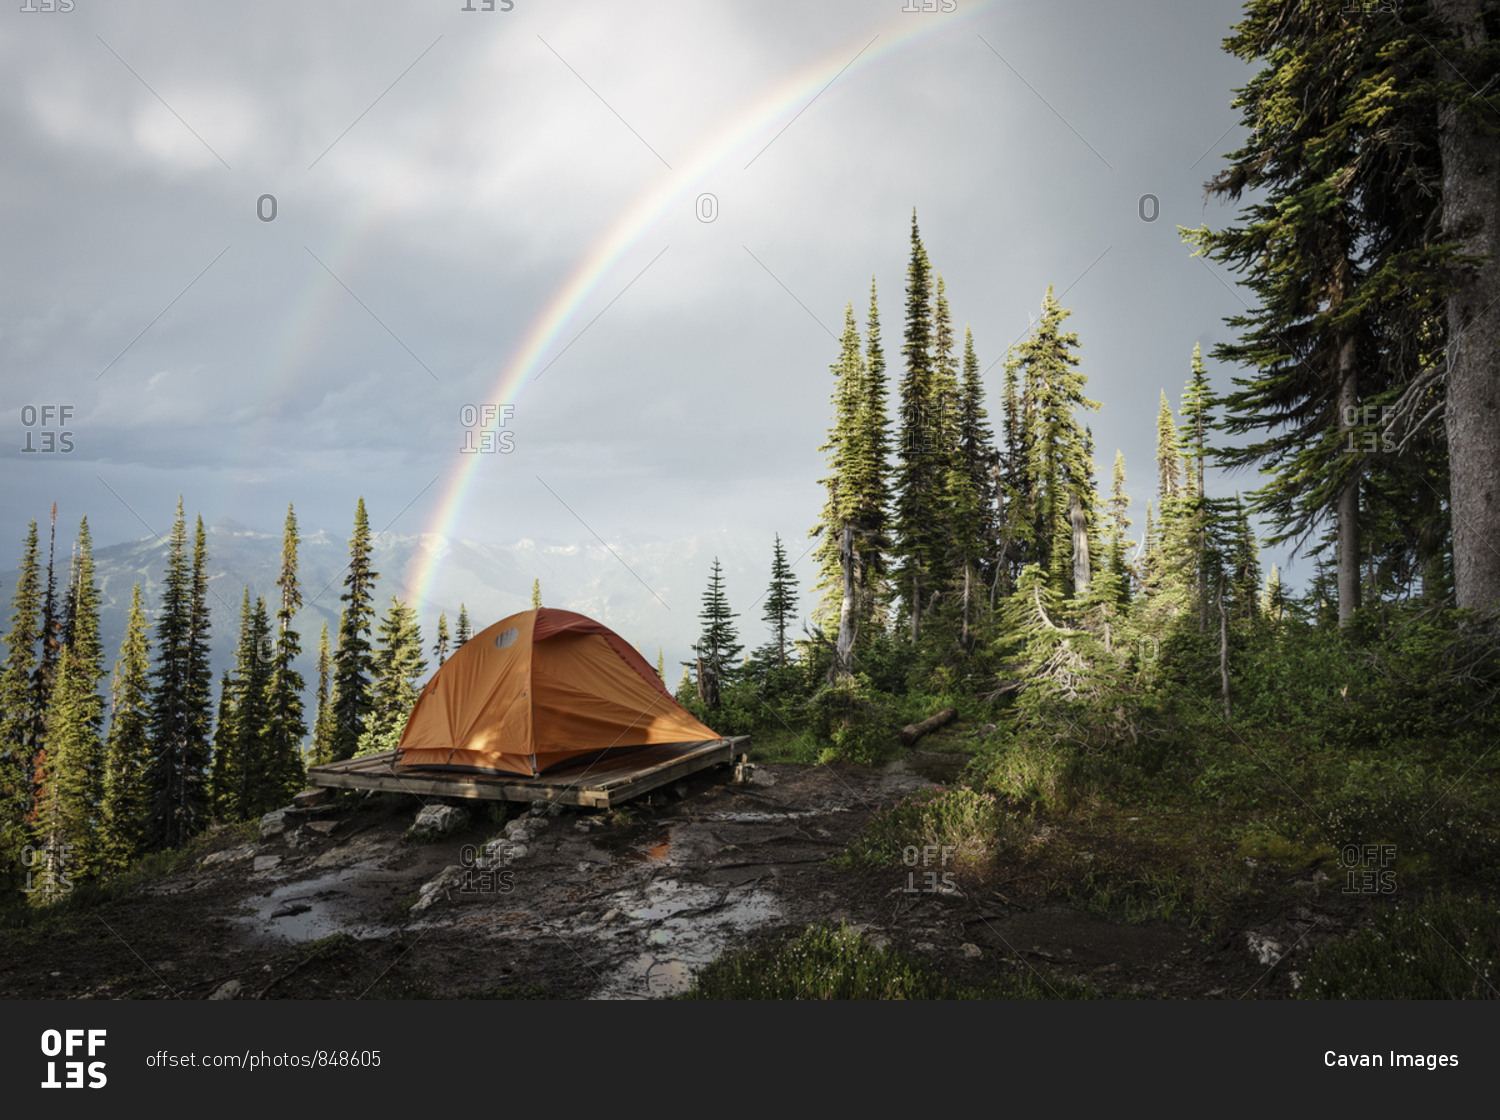 Camping tent in mountain forest with rainbow, British Columbia, Canada